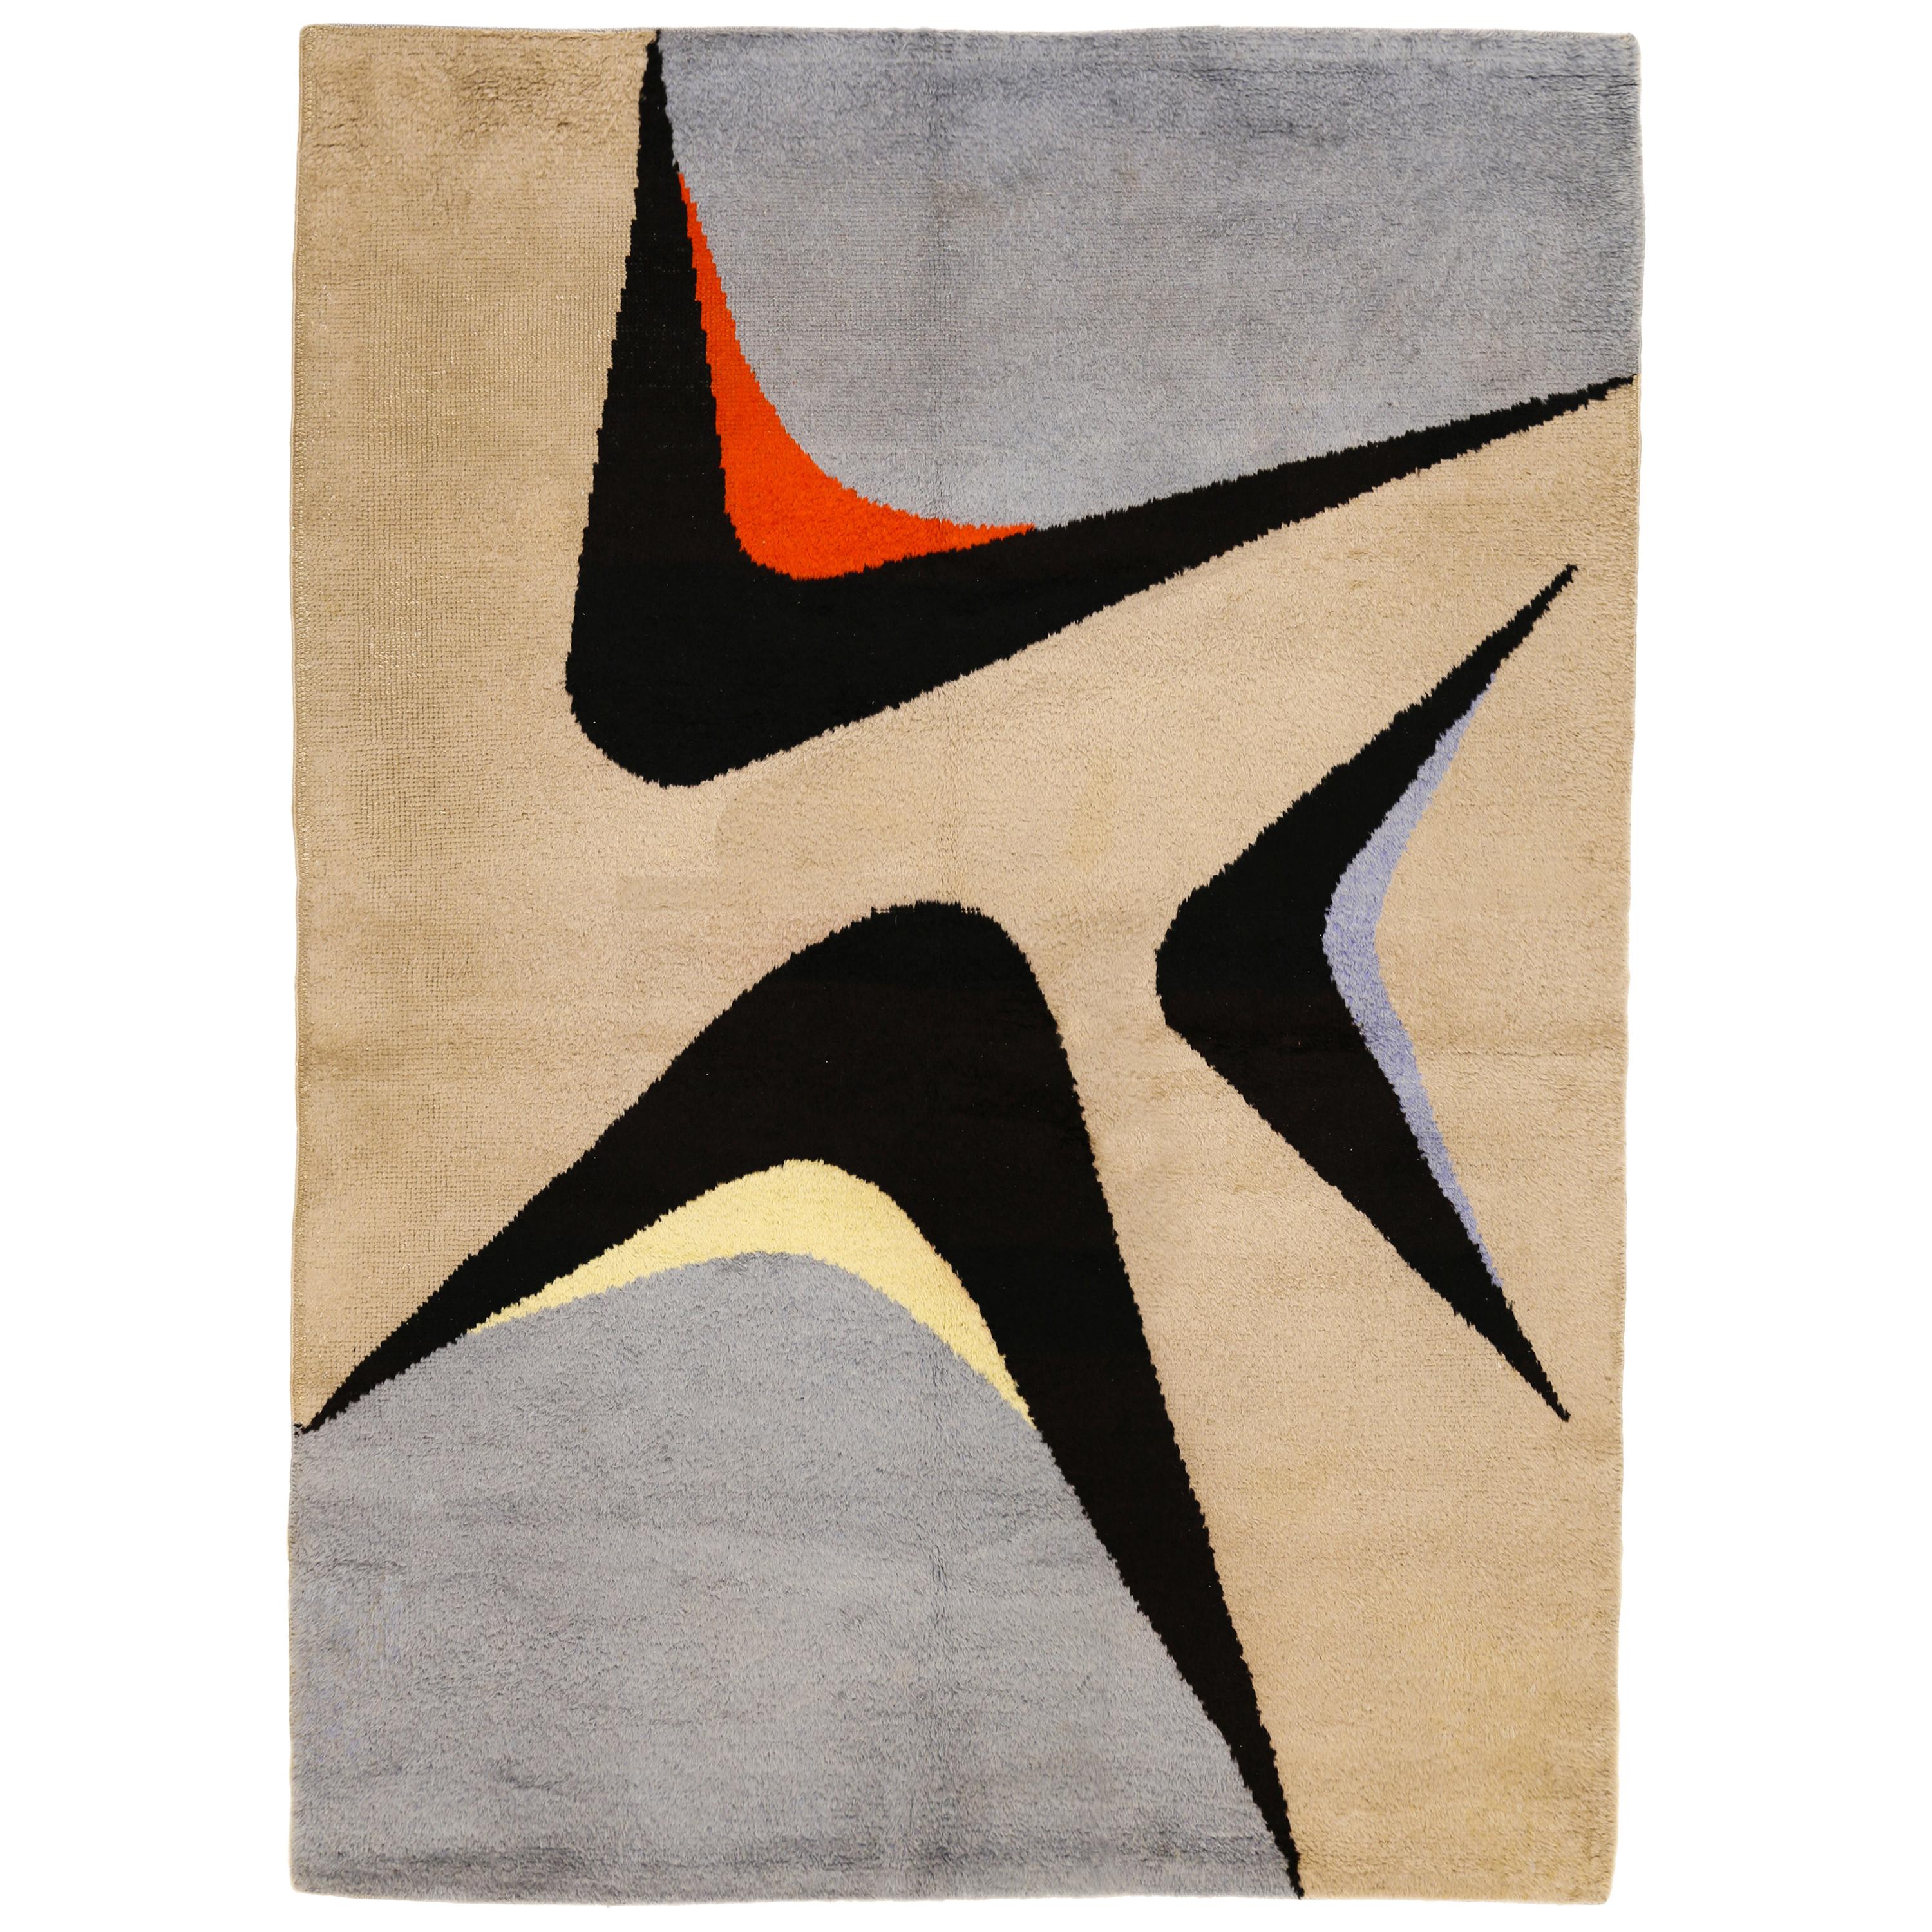 French Midcentury Design Rug by Jacques Borker For Sale